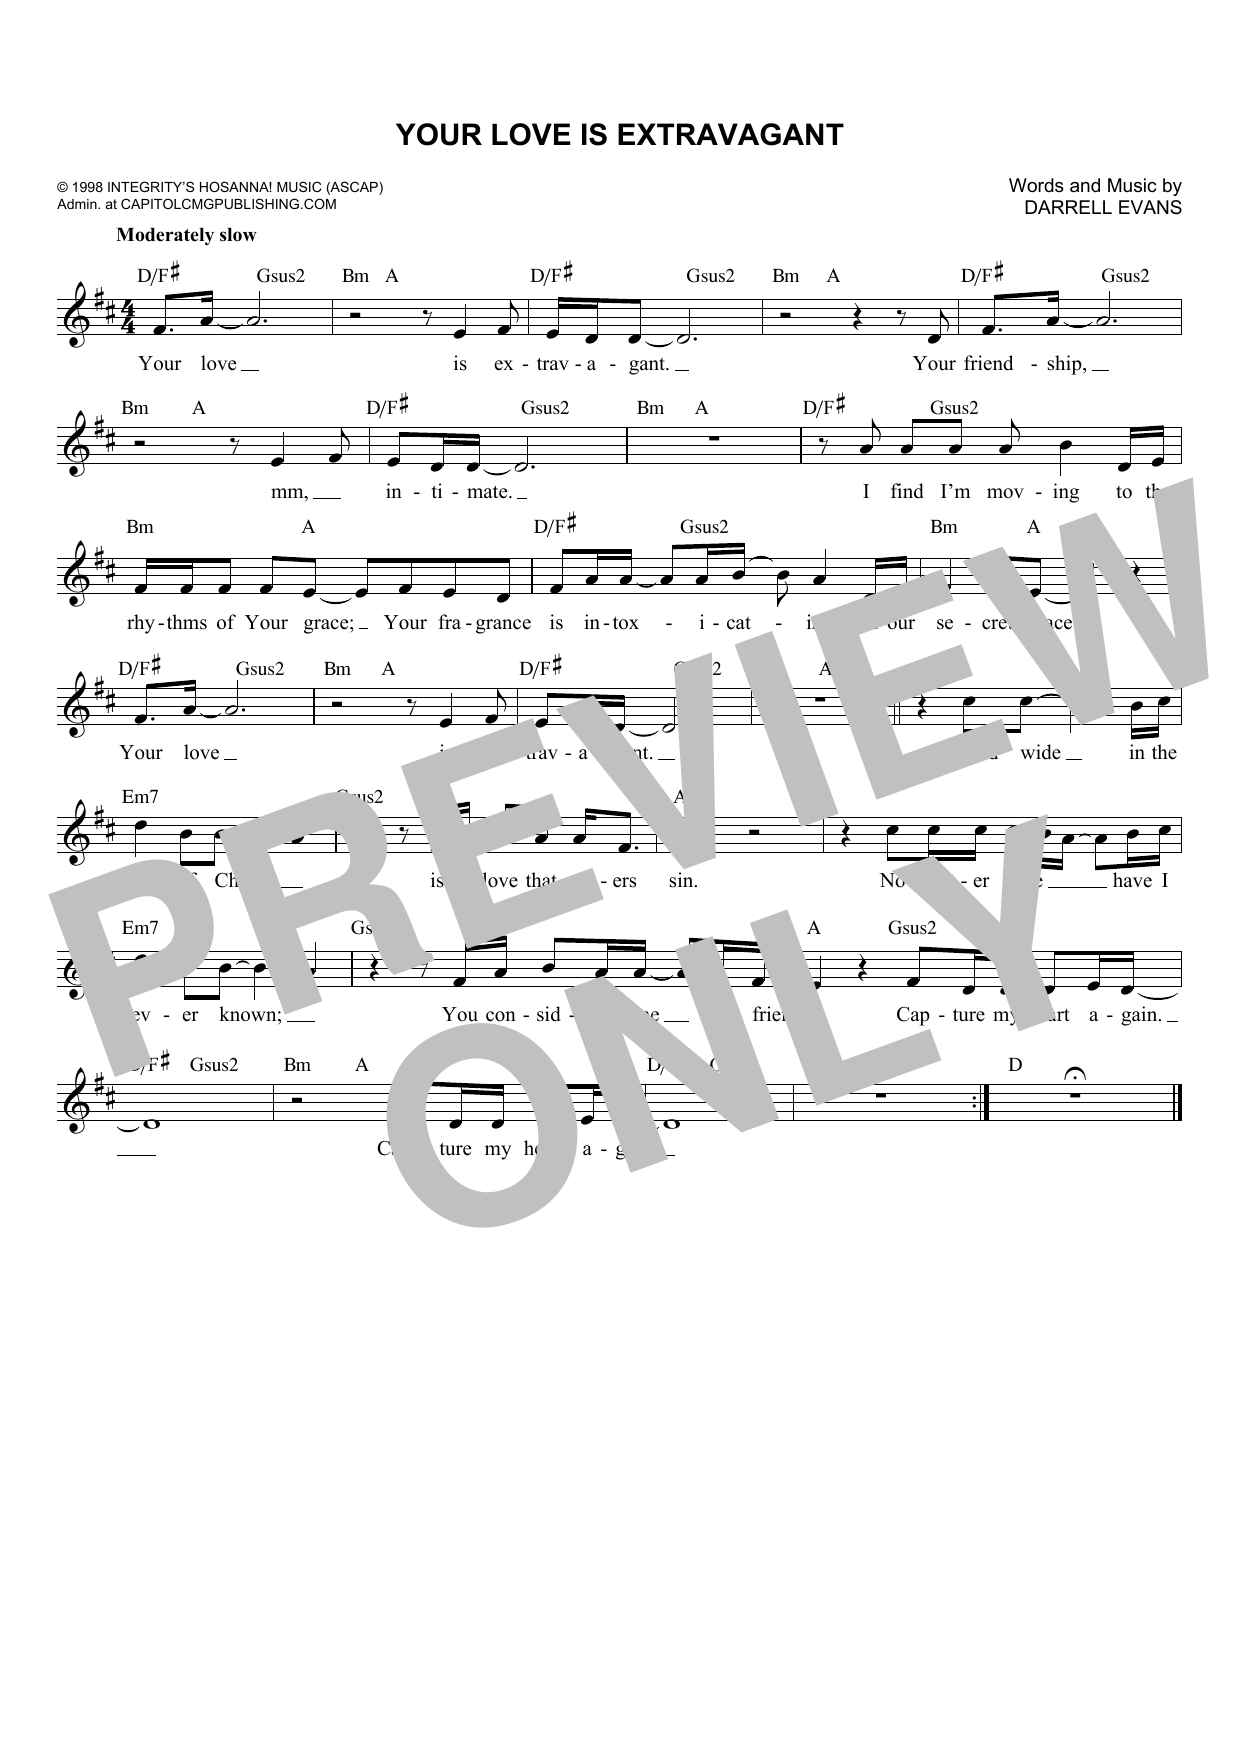 Download Darrell Evans Your Love Is Extravagant Sheet Music